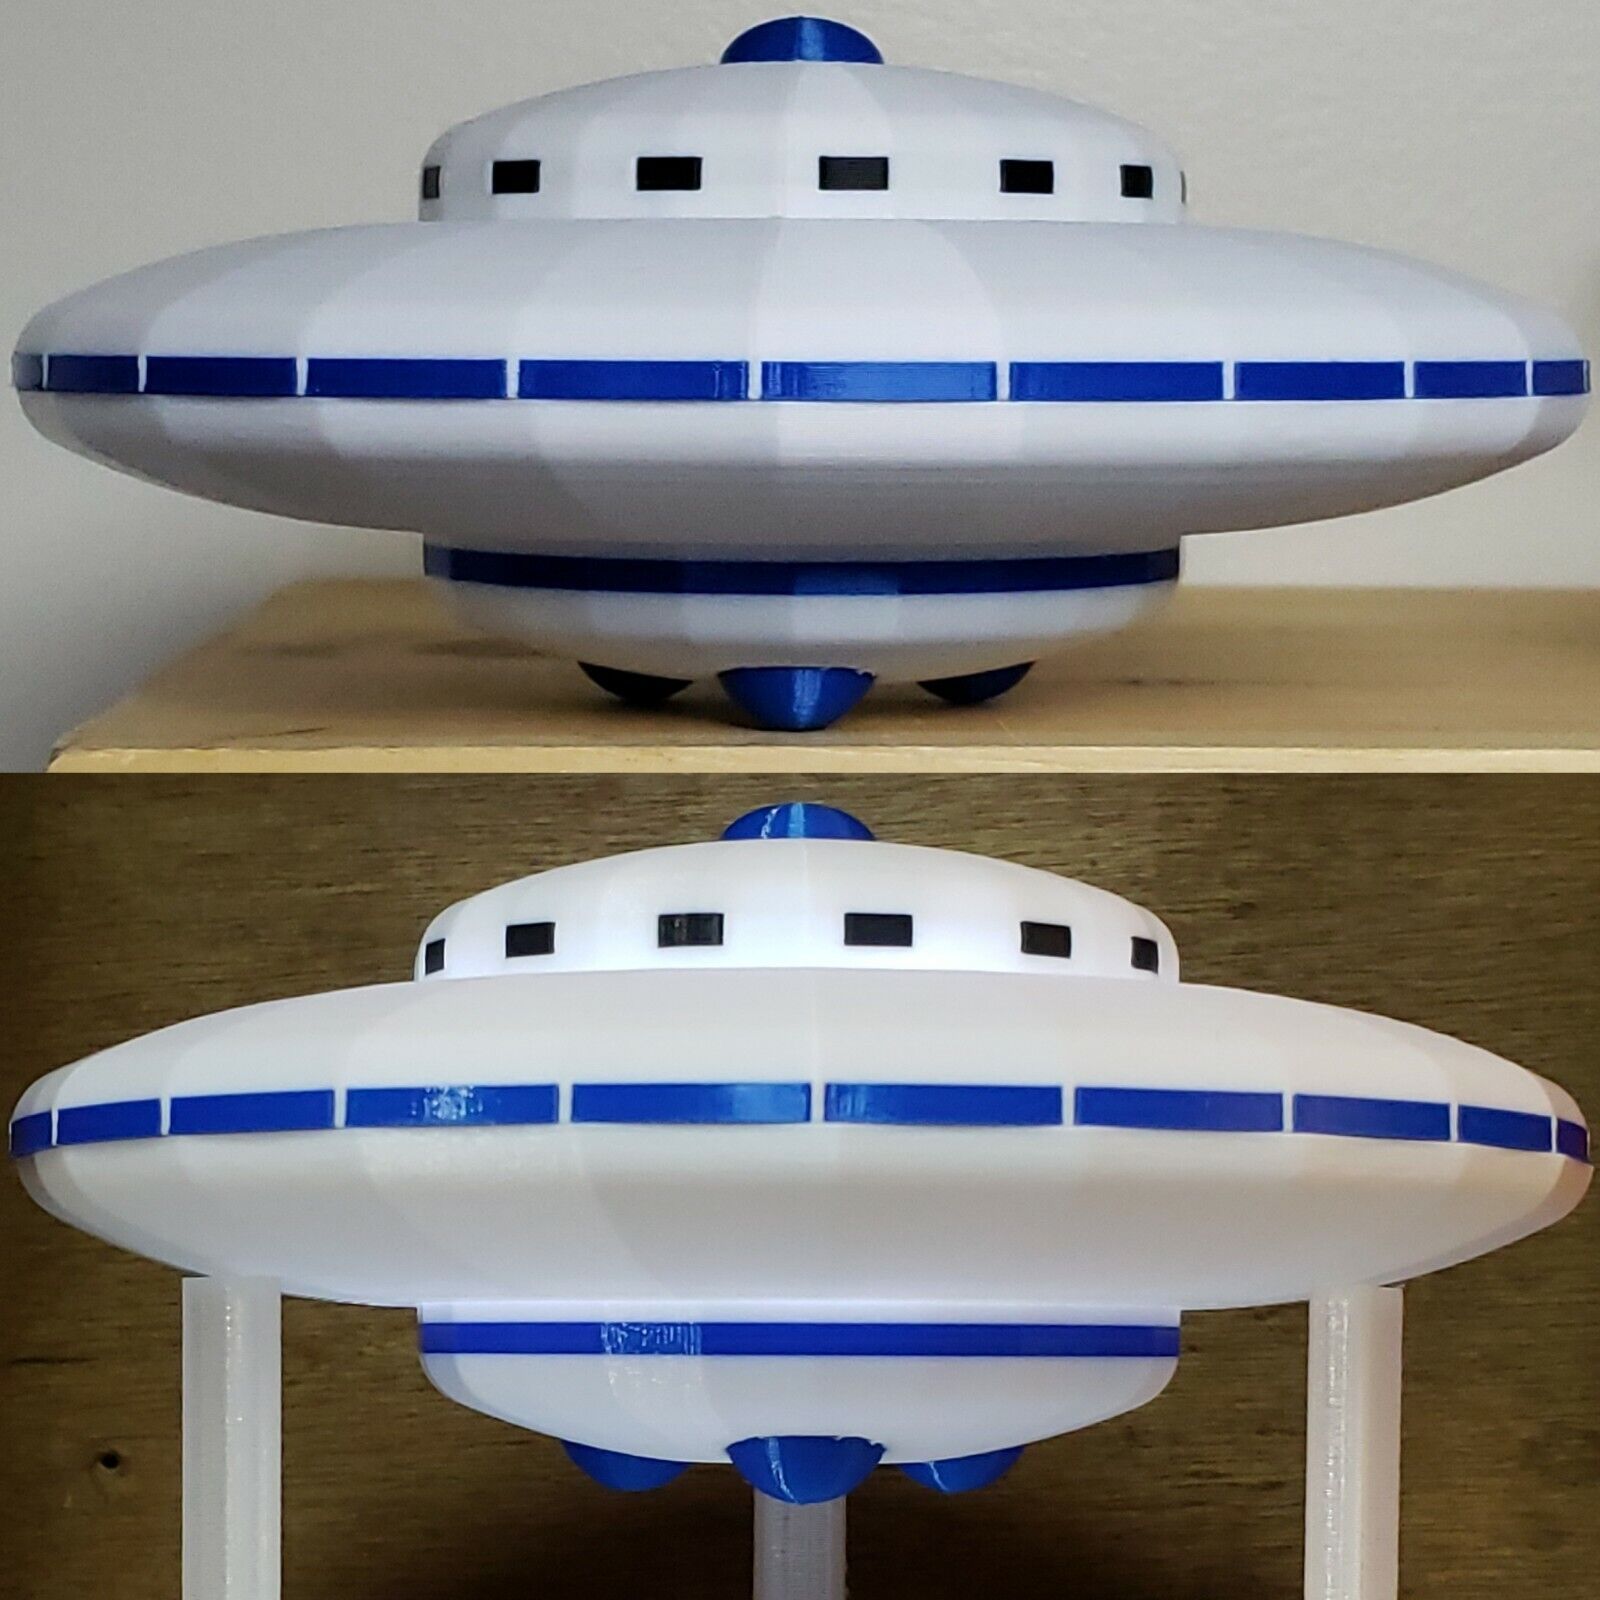 XilienUFO/FlyingSaucer-Invasion of the AstroMonster/MonsterZero-Large-colorType1